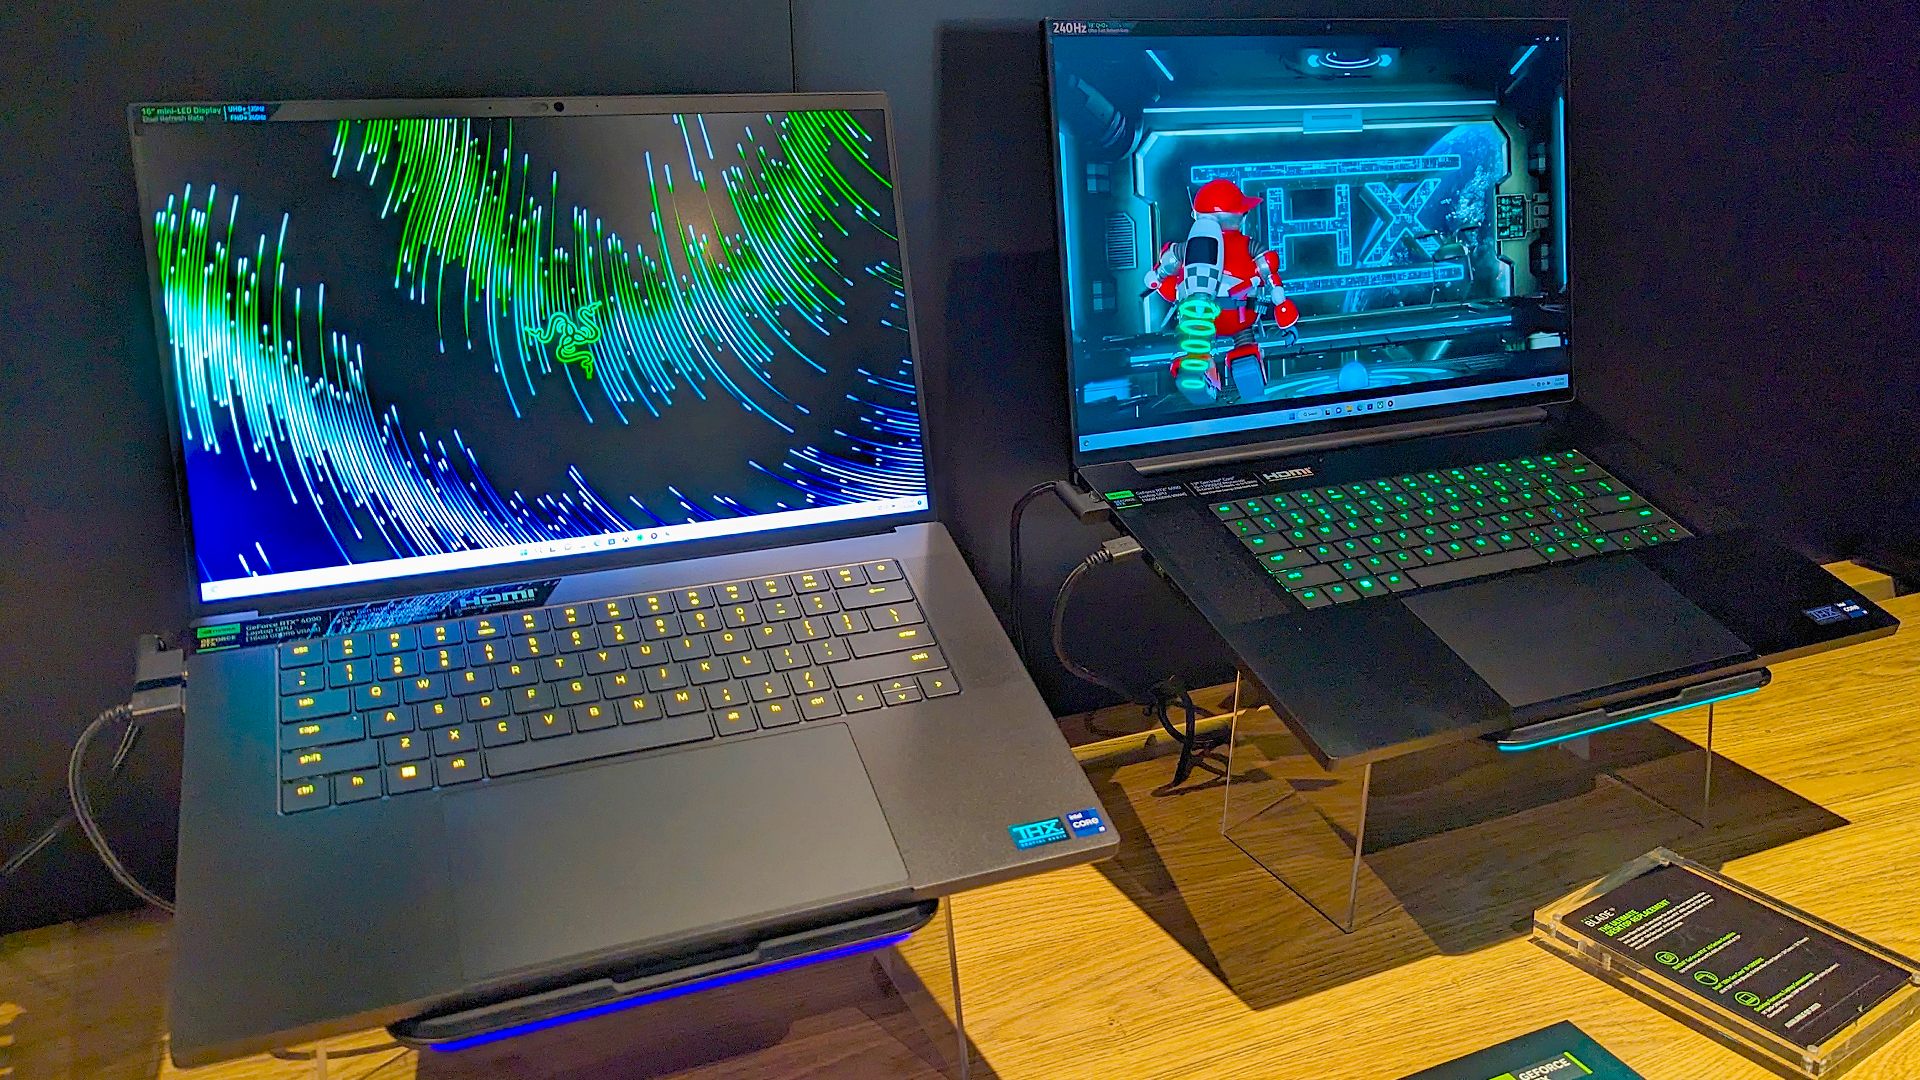 Razer RTX 4090 gaming laptop boasts screen swapping superpowers